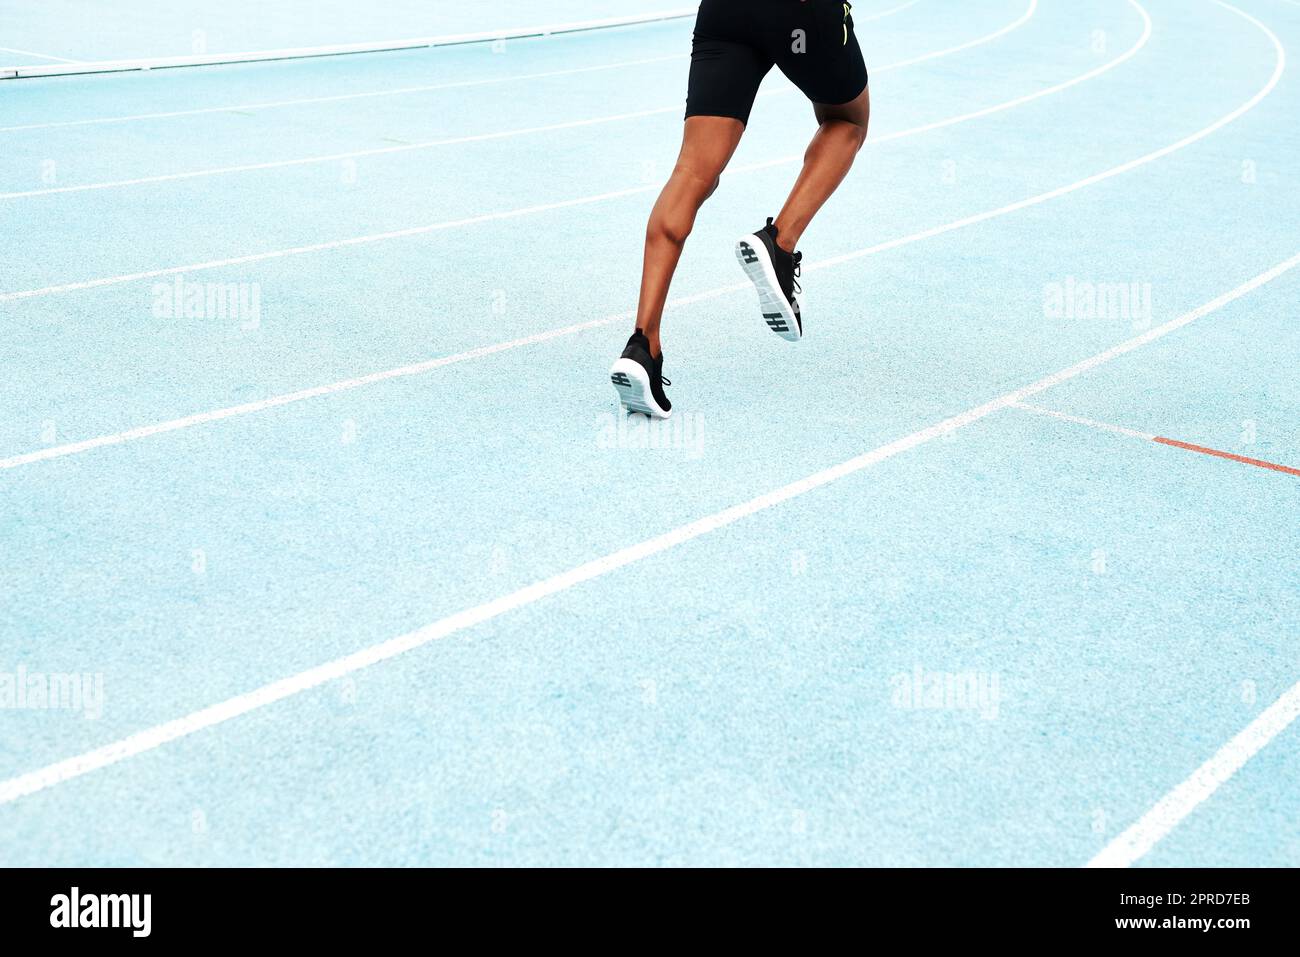 Building up my strength for the race. an unrecognizable athlete running along a track field alone during an outdoor workout session. Stock Photo